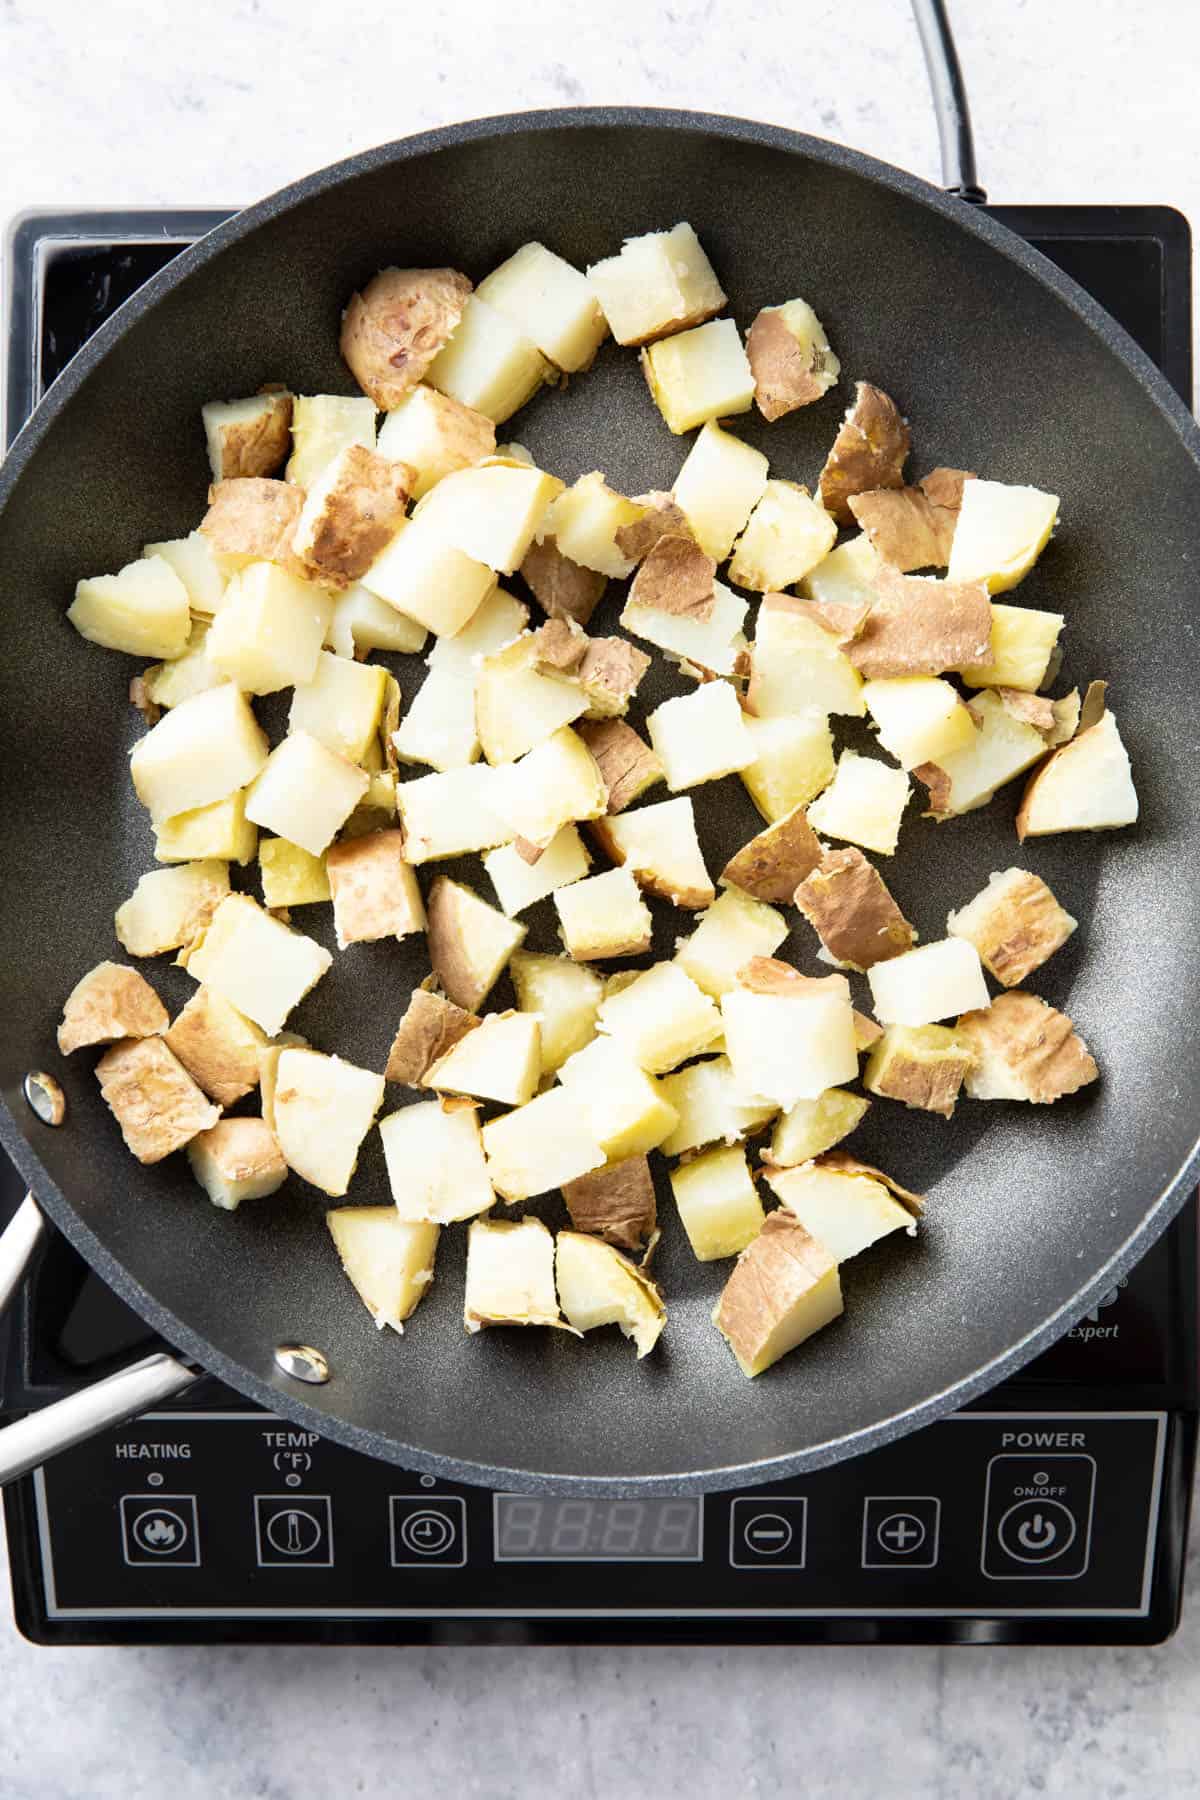 Chopped potatoes cooking on a nonstick skillet over heat 